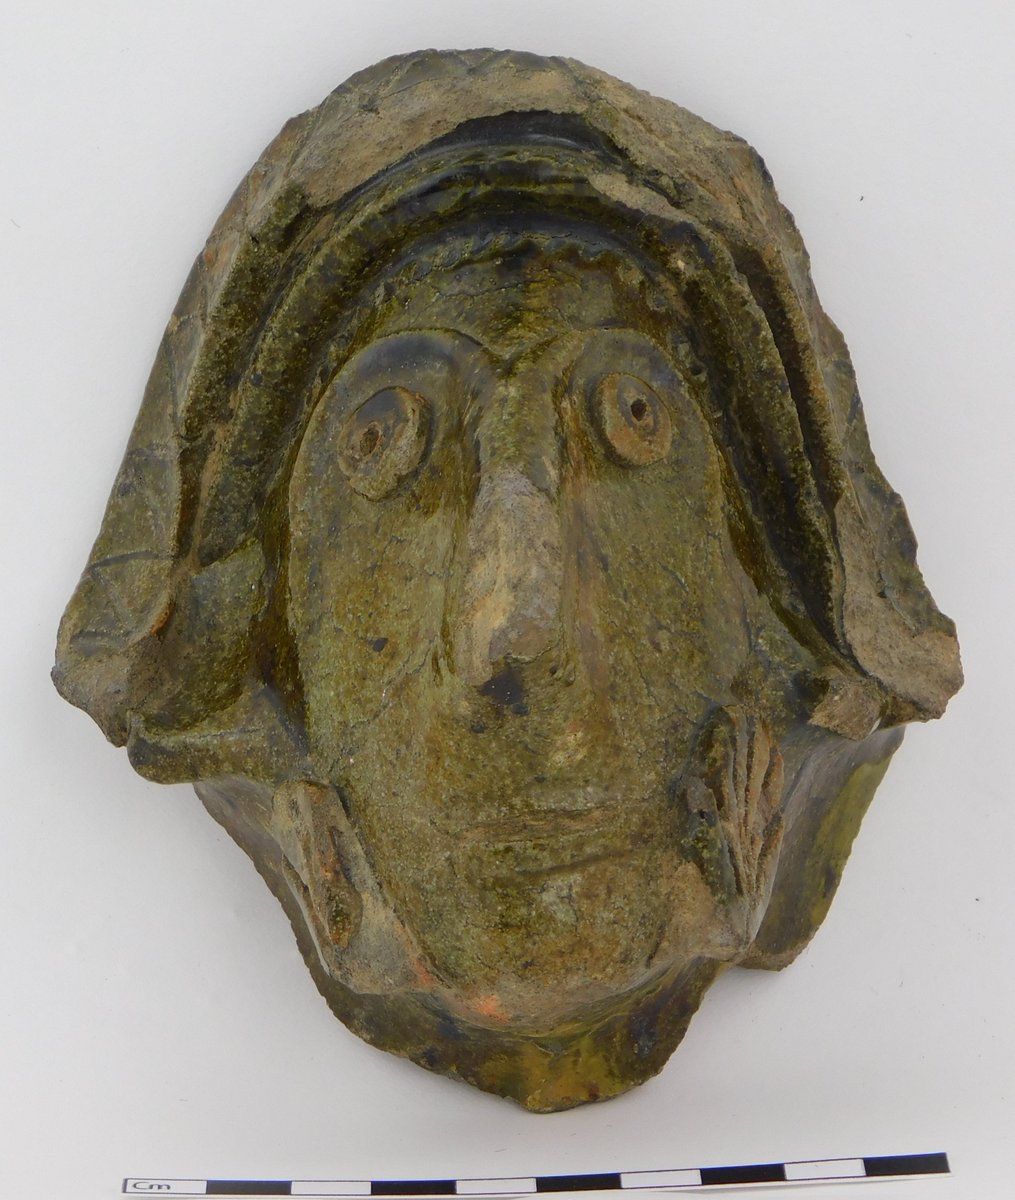 A final object from our #MuseumDocumentation project: a 13th – 14th Century roof finial, of London-Type ware, coated in green glaze and shaped into the form of a human head who is resting their hands on their chin. Its find location is unknown. #archaeology #cataloguing